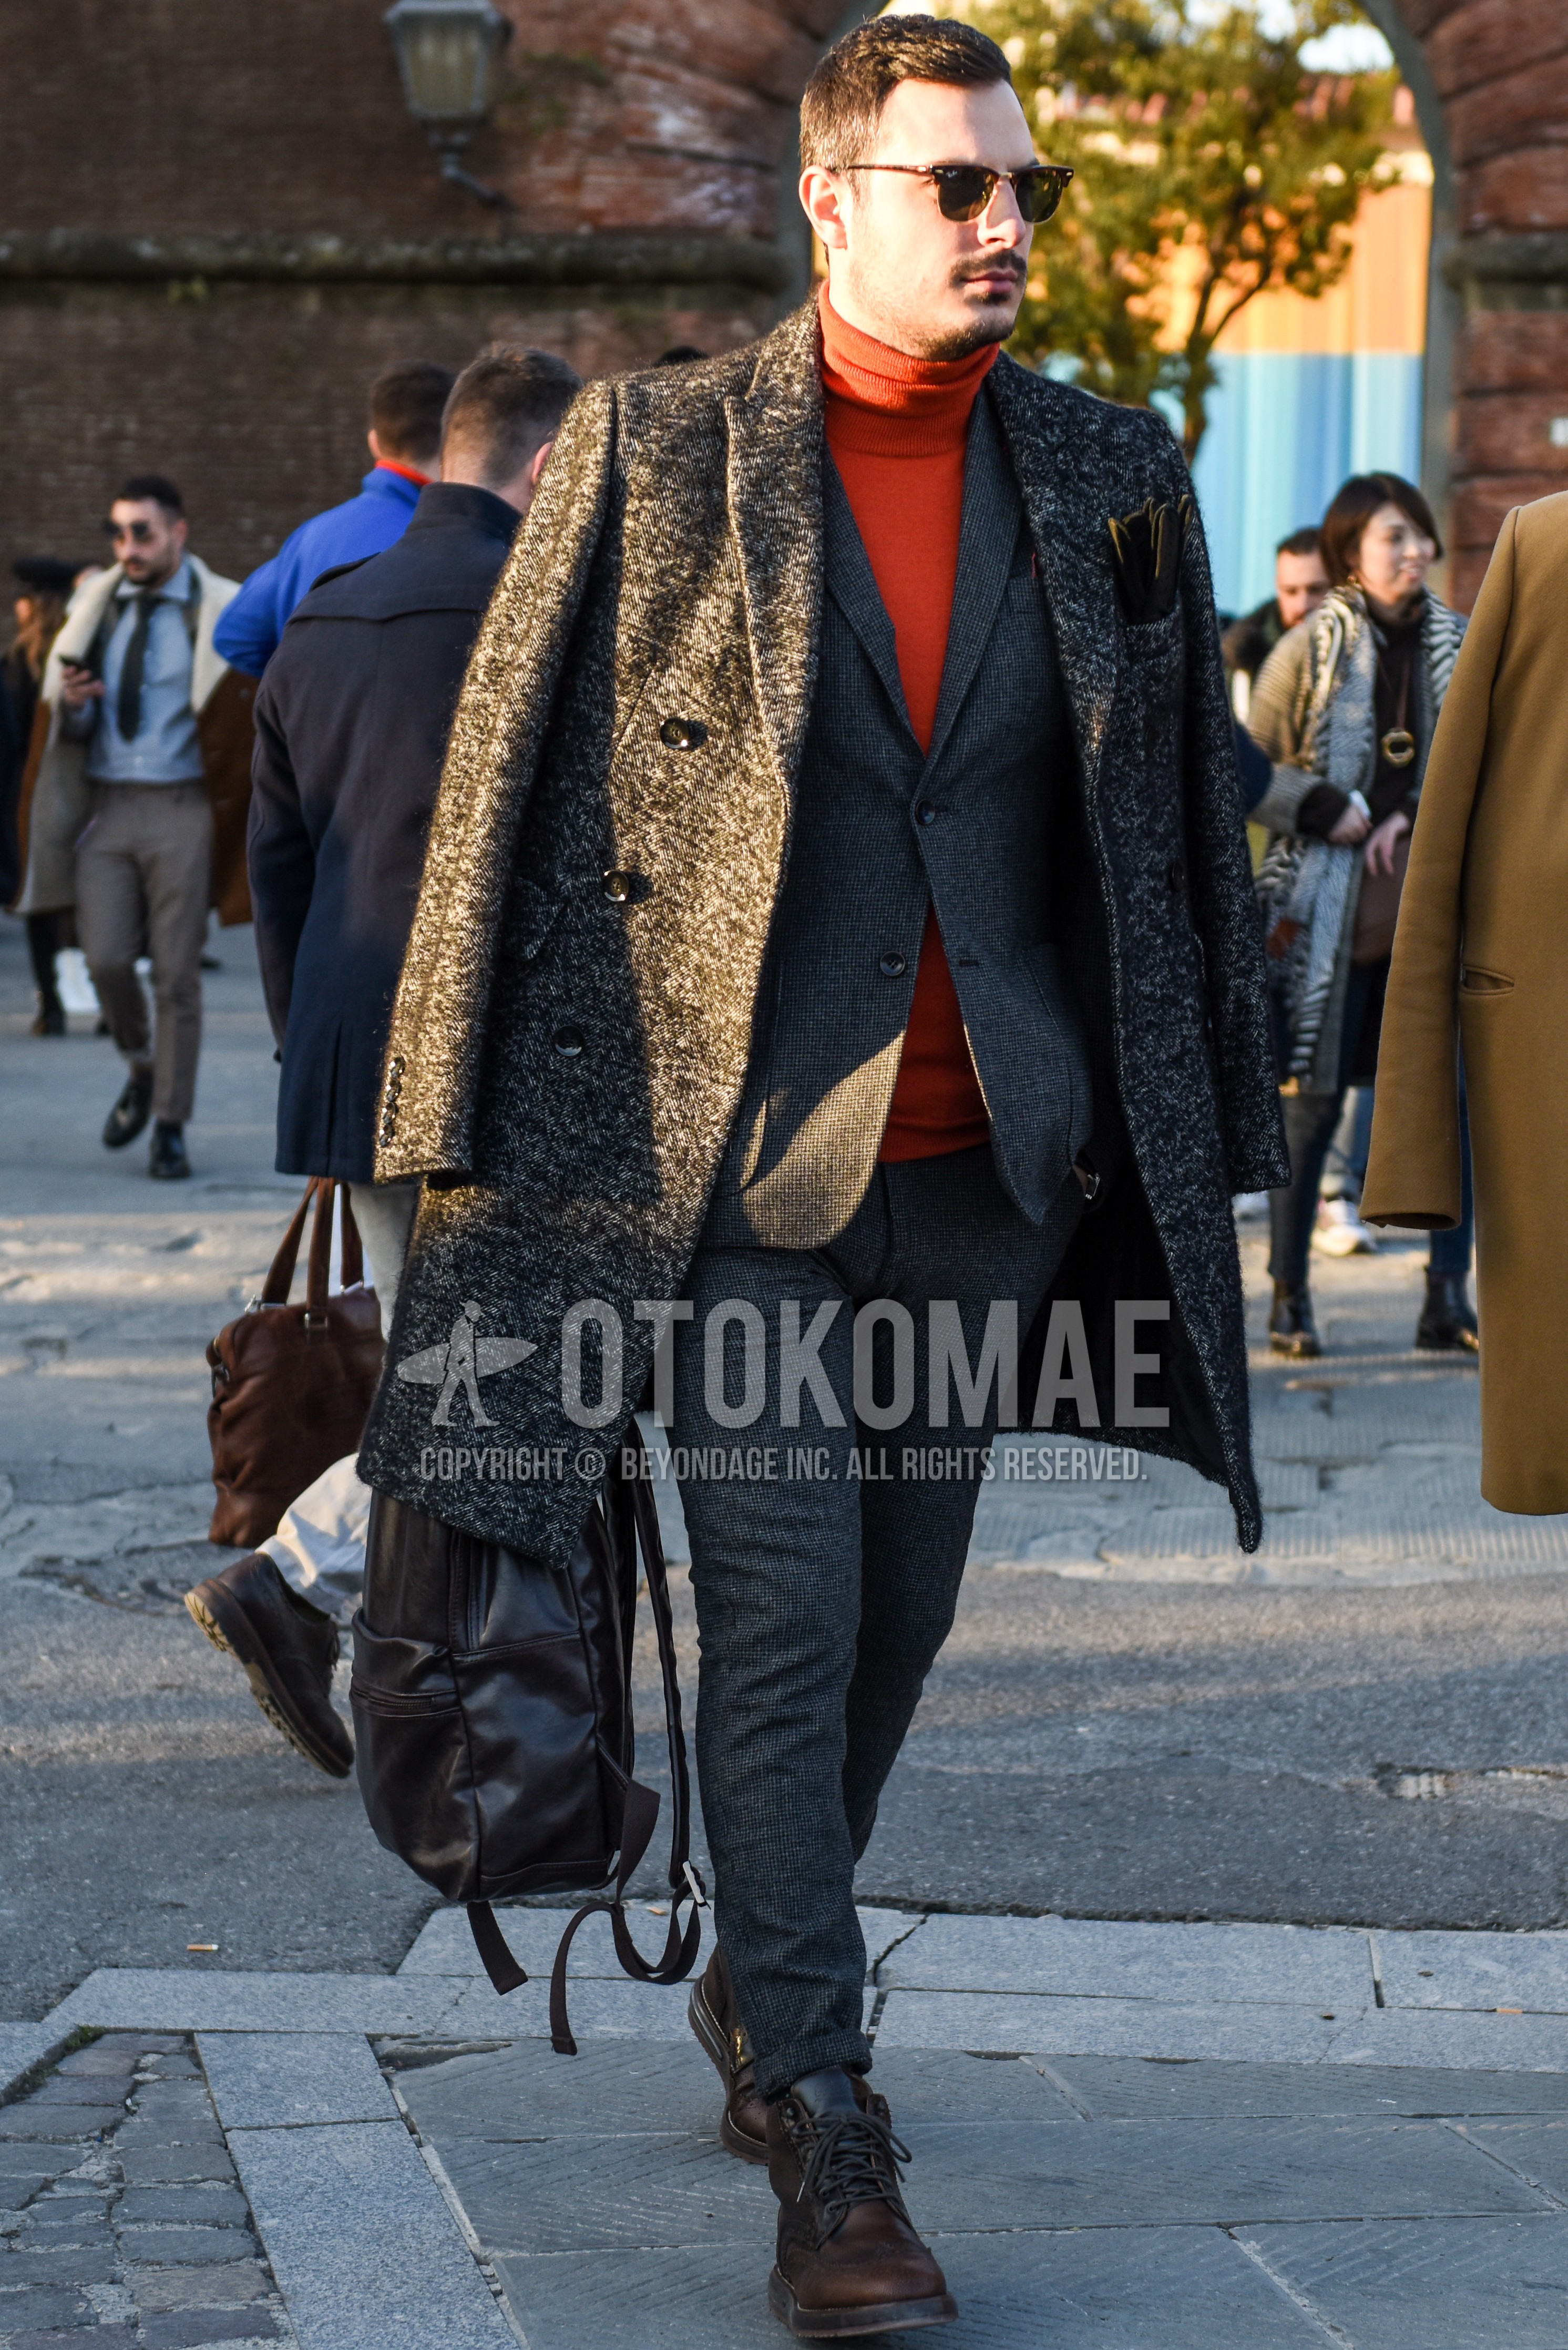 Men's autumn winter outfit with brown tortoiseshell sunglasses, gray outerwear chester coat, orange plain turtleneck knit, brown work boots, gray check suit.